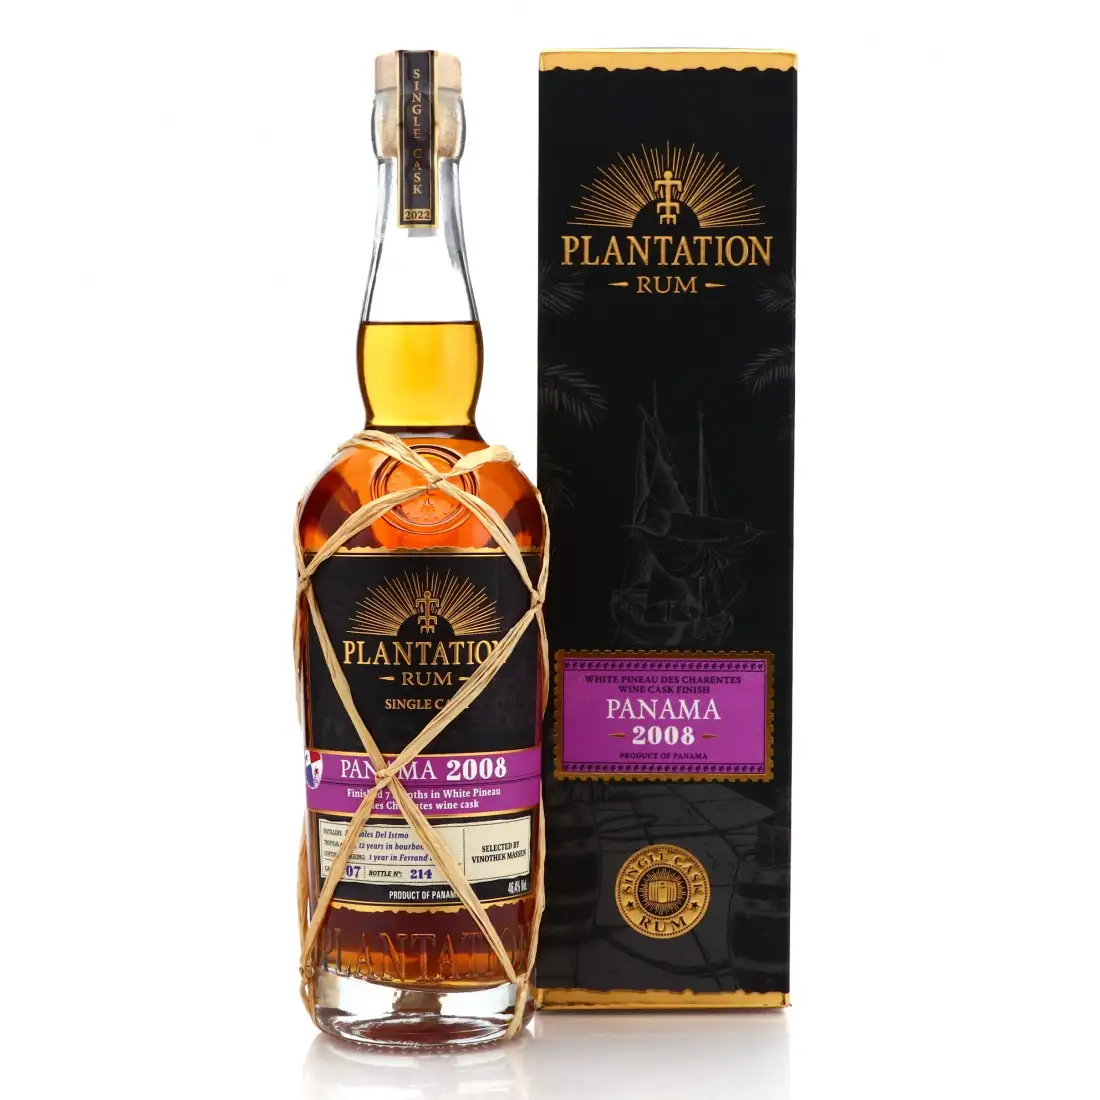 Image of the front of the bottle of the rum Plantation Panama 2008